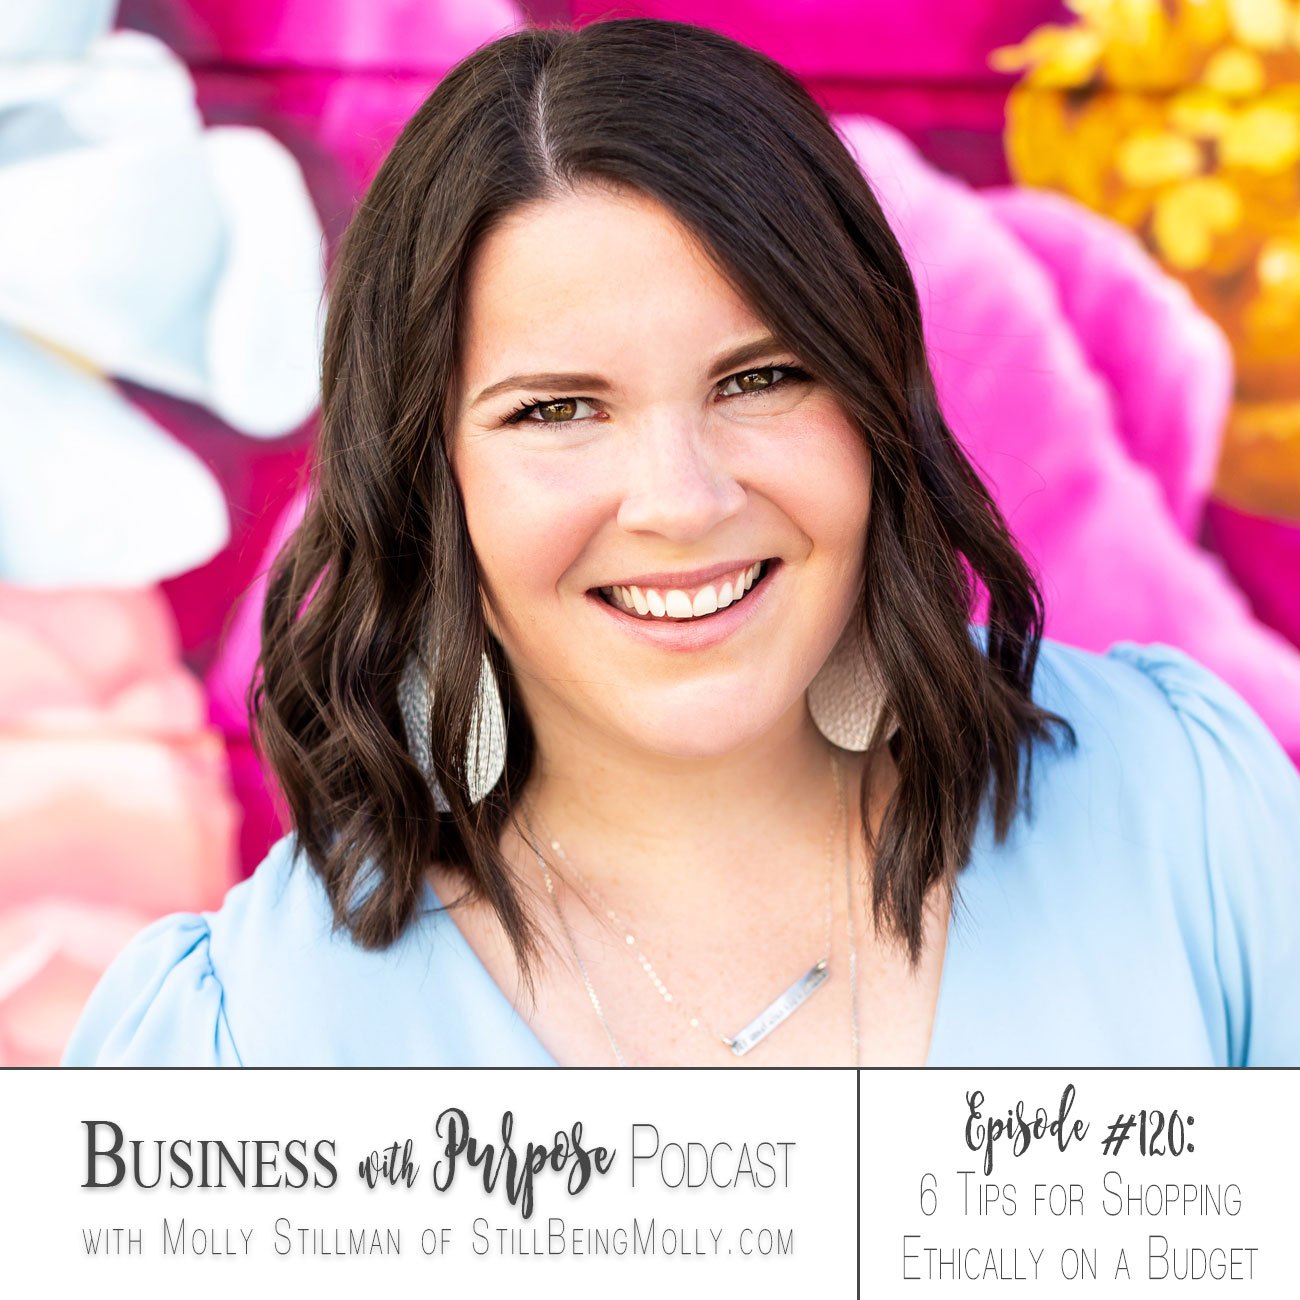 Business with Purpose Podcast EP 120: 6 Tips for Shopping Ethically on a Budget